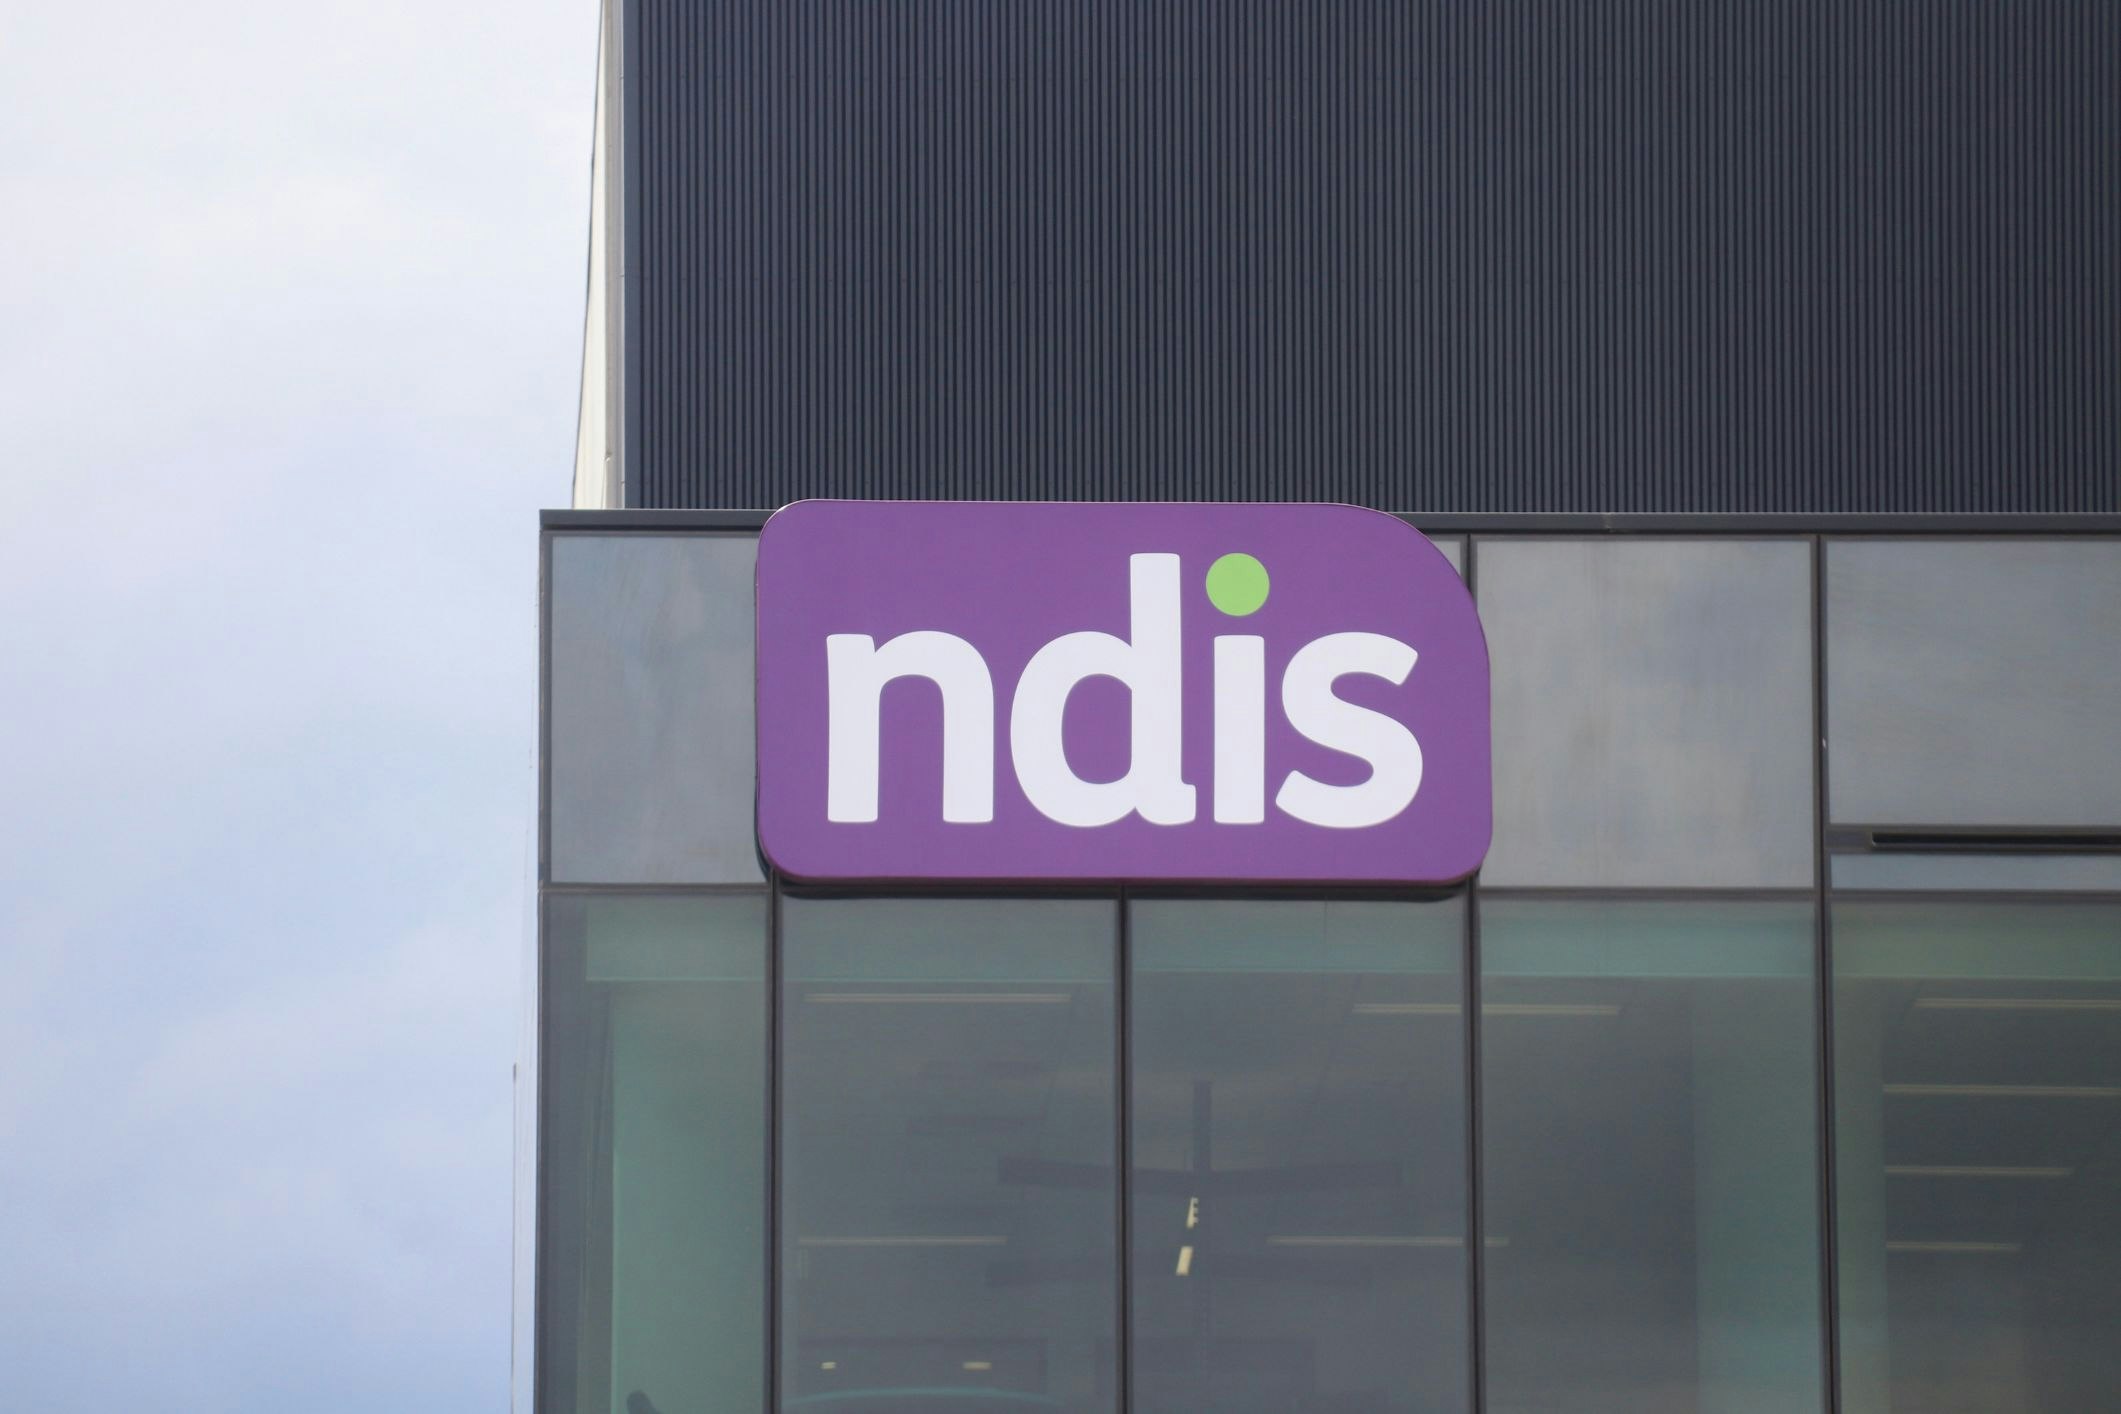 The Working together to deliver the NDIS report has revealed how the government intends to change the system that supports people with disability [Source jadecraven via Shutterstock]
